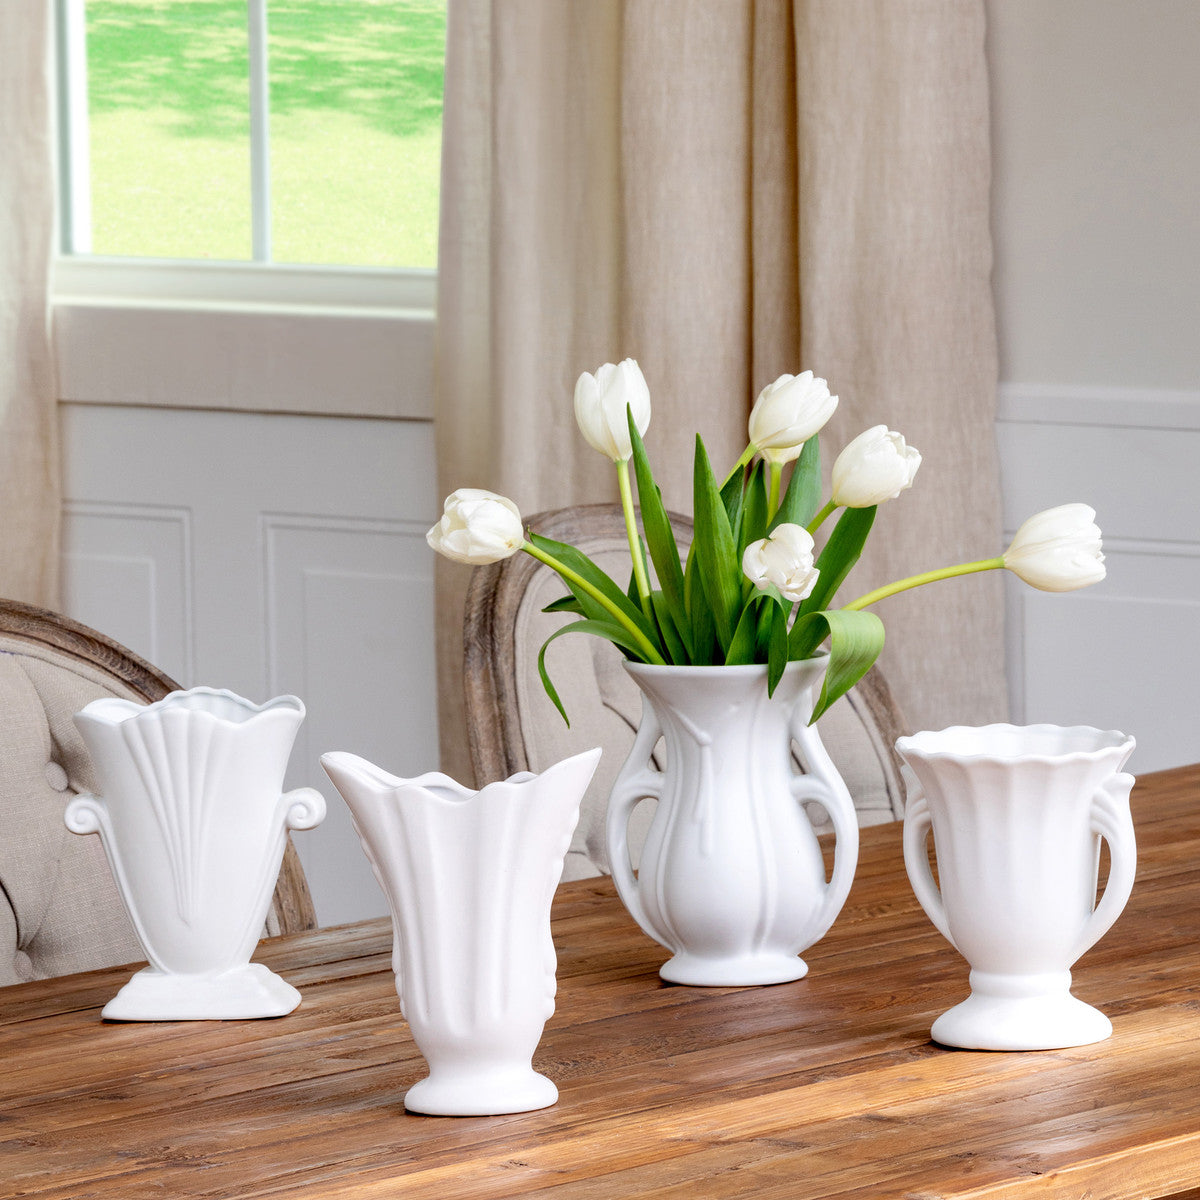 Vintage-Style Flower Vase Collection (S/4)